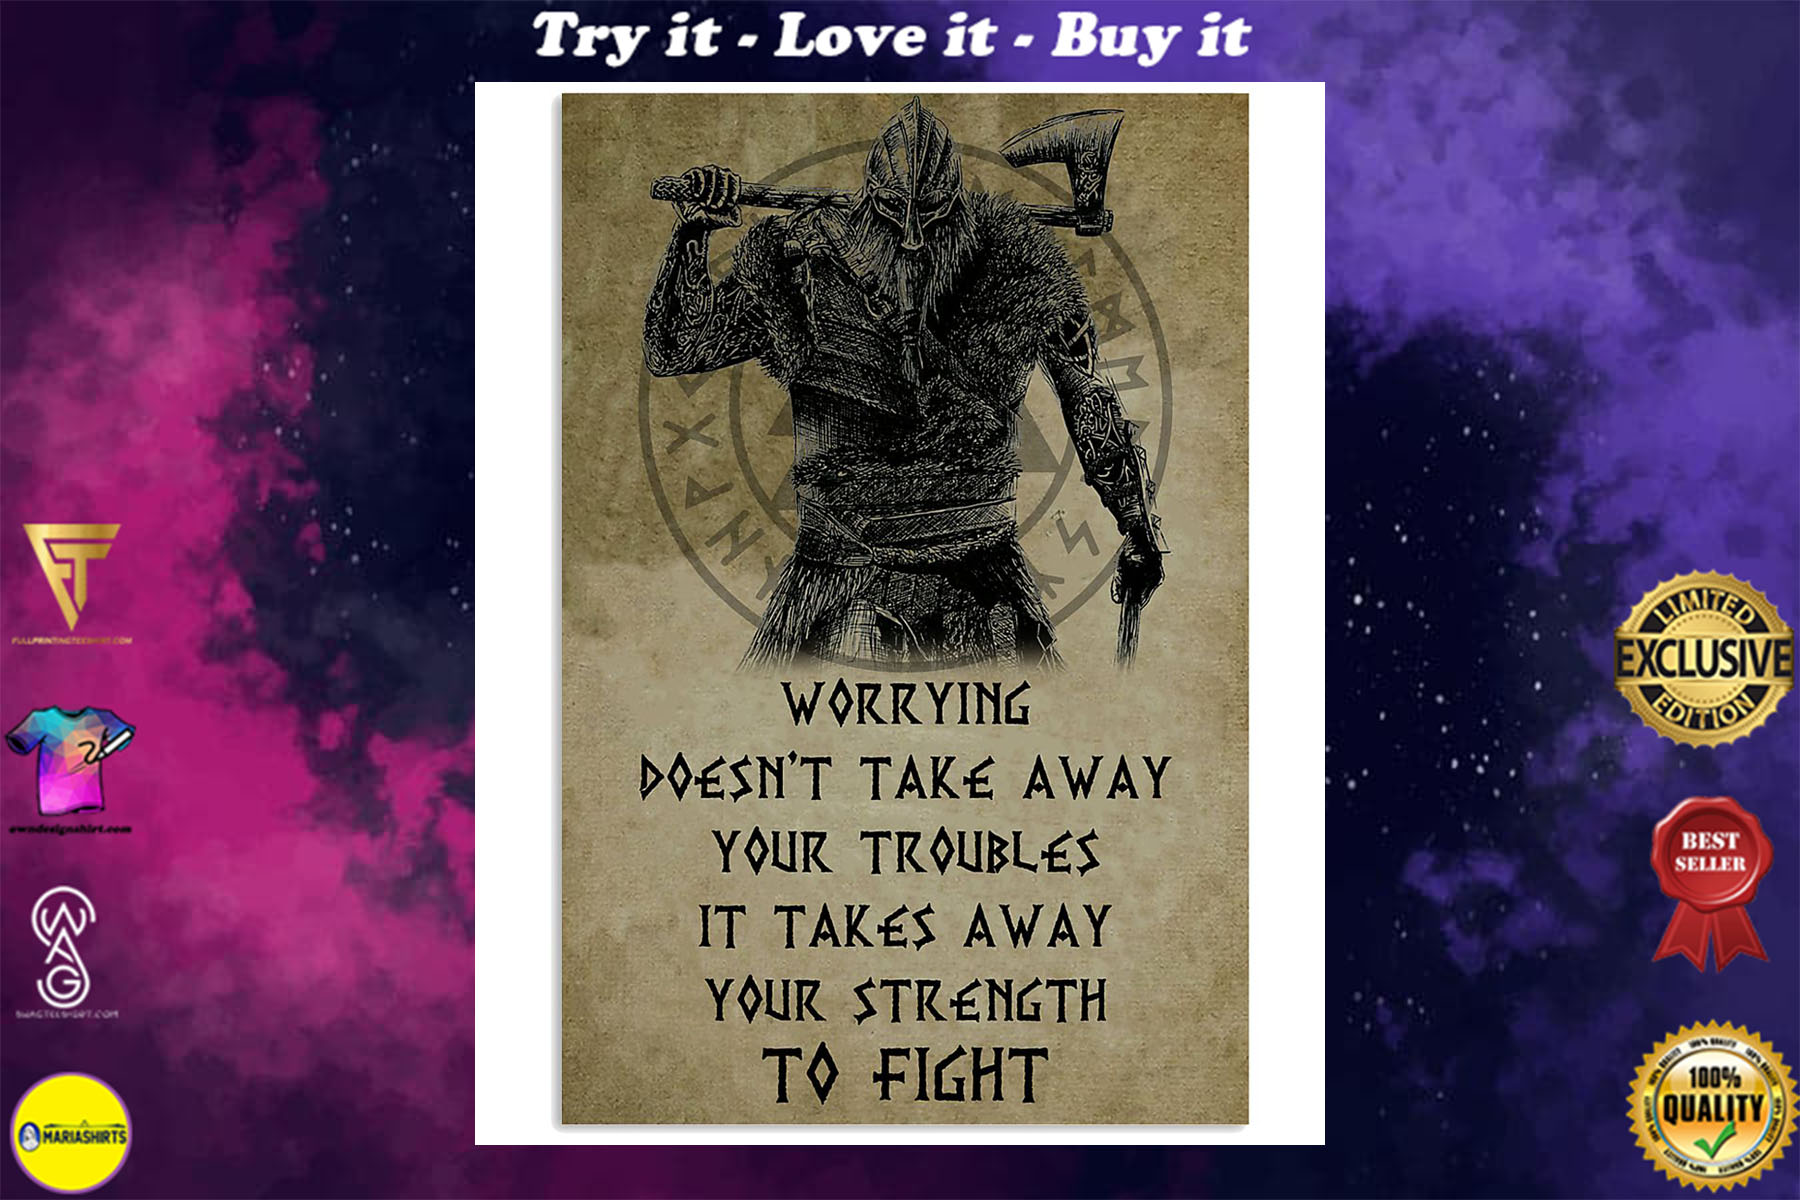 viking worrying doesnt take away your troubles it takes away poster